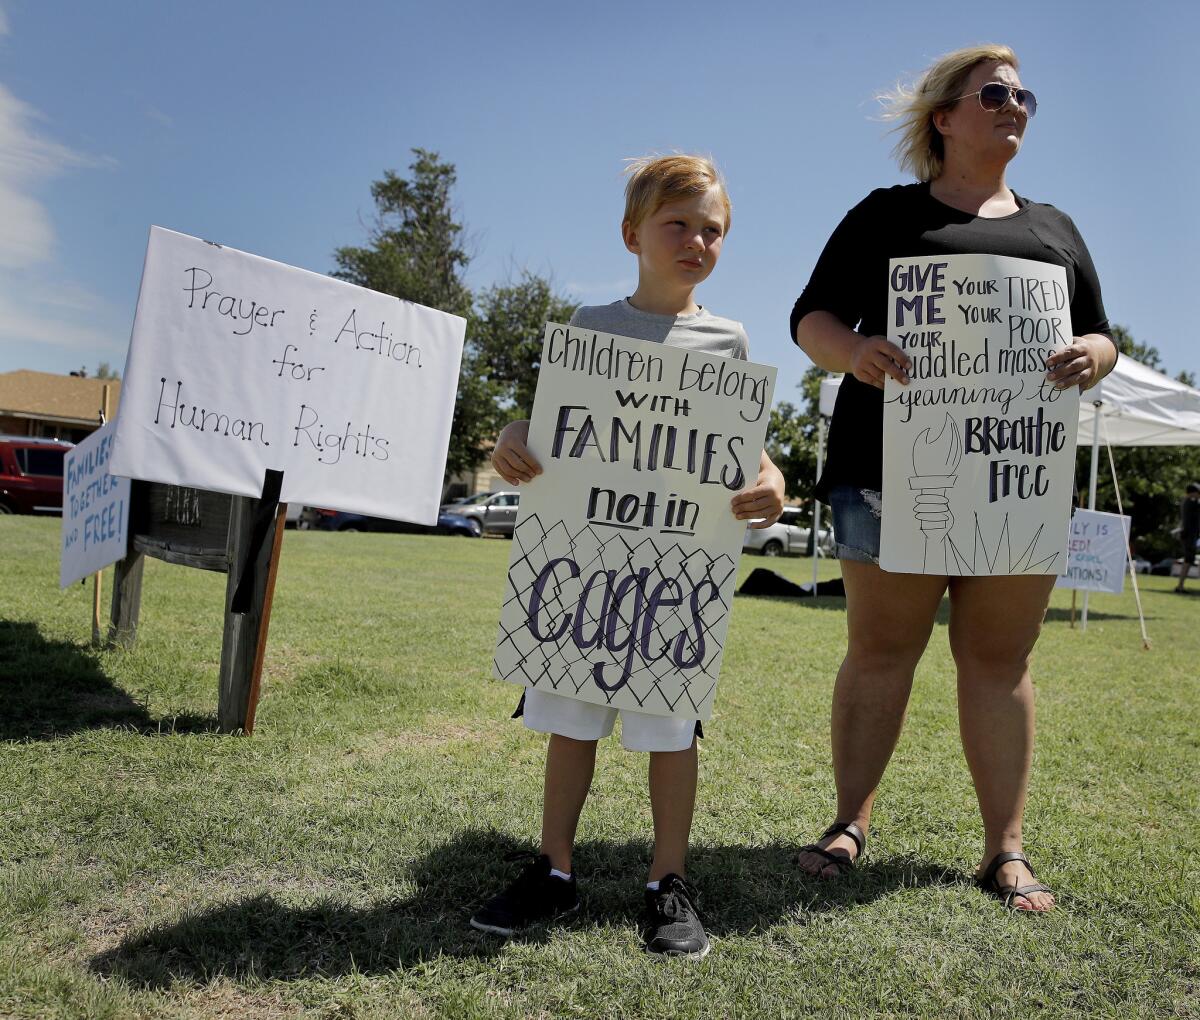 DODGE CITY, KAN.: Bennett Heeke, 5, and his mother, Sarah Doll Heeke, hold signs at a rally protesting U.S. immigration policies.